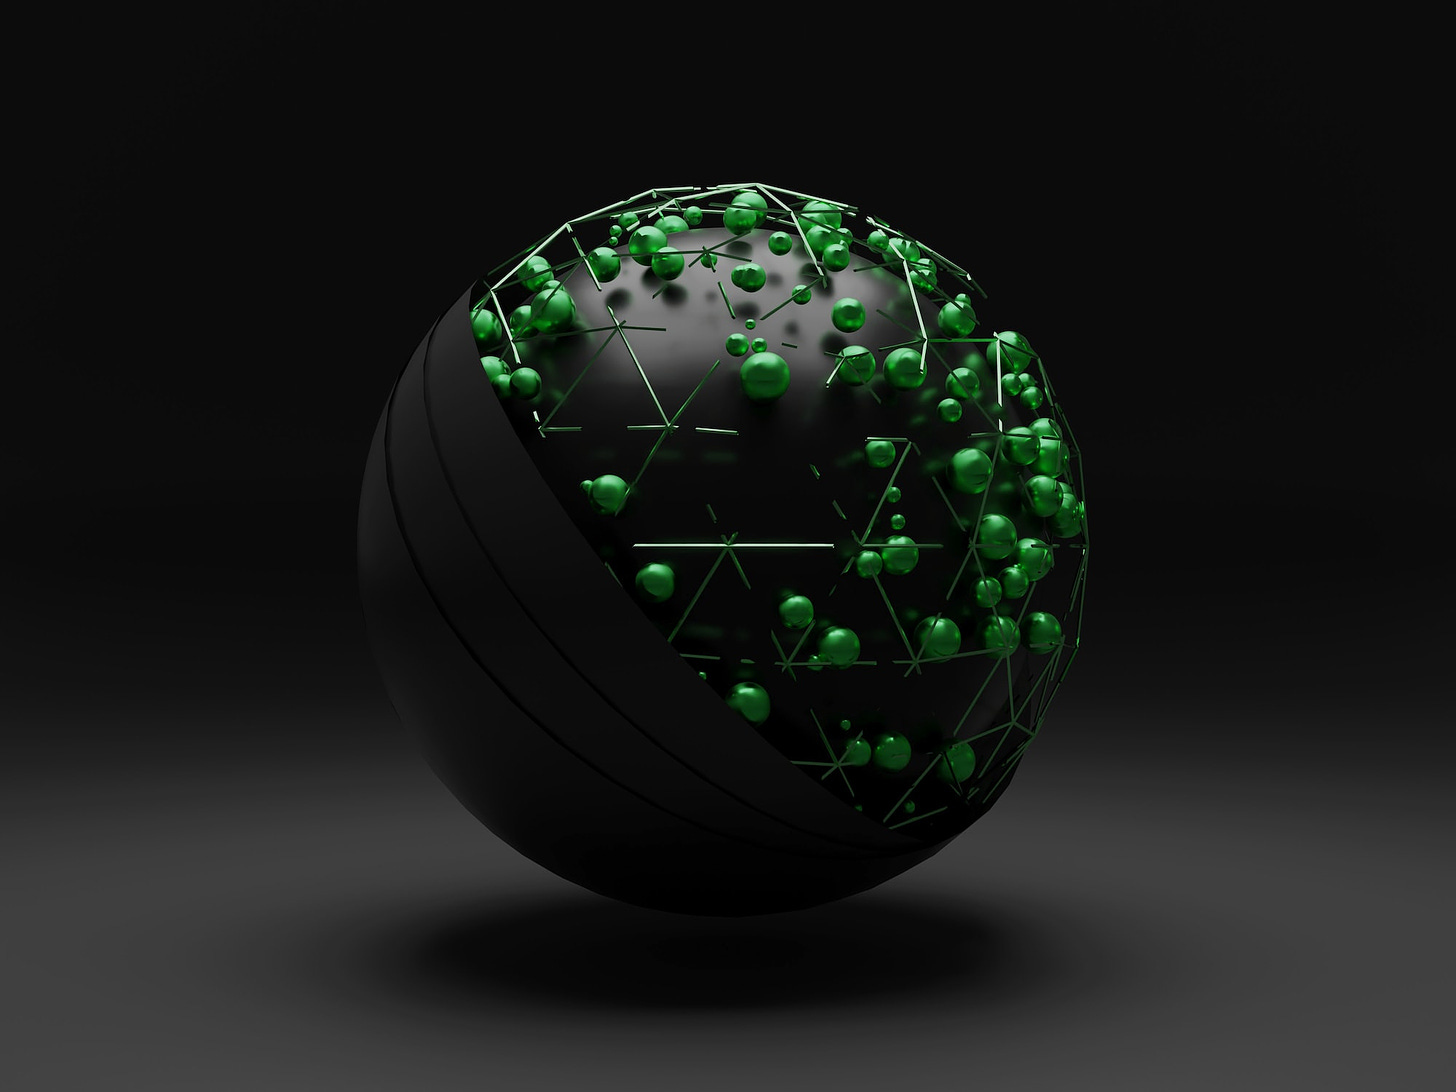 3d illustration of a sphere with lots of small green colored balls hovering over it.